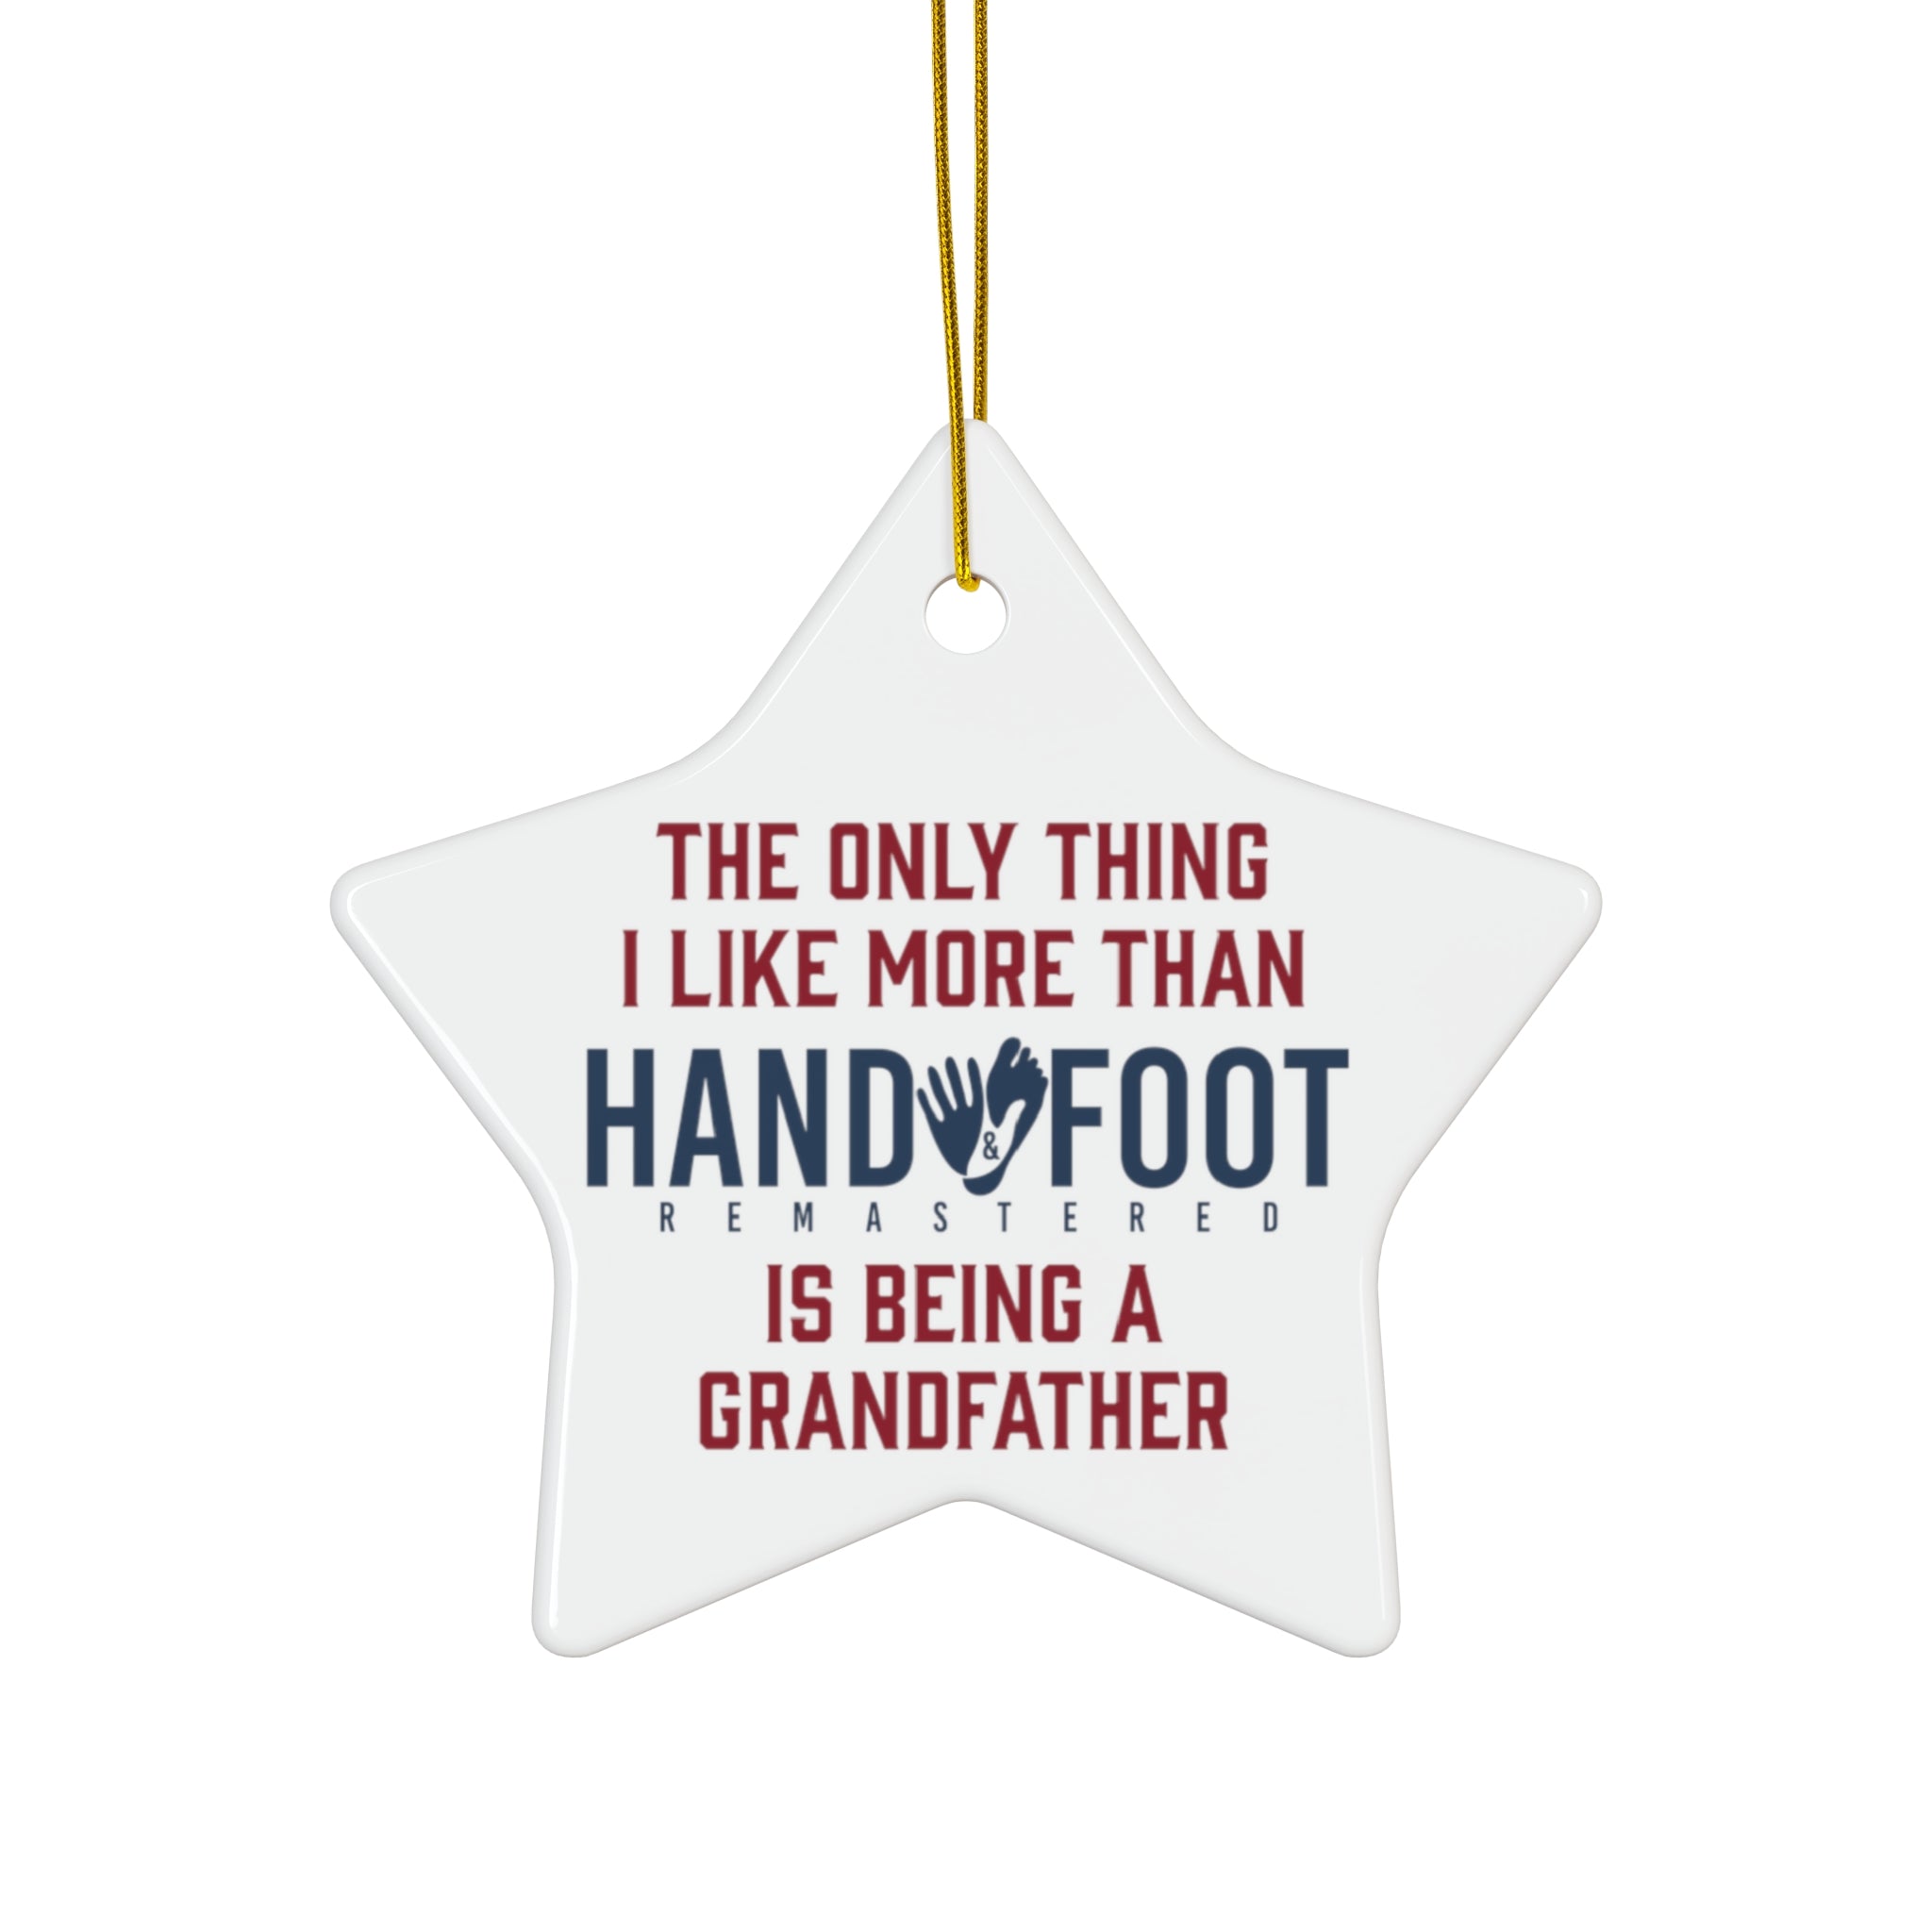 Being a Grandfather Ceramic Ornament, 3 Shapes